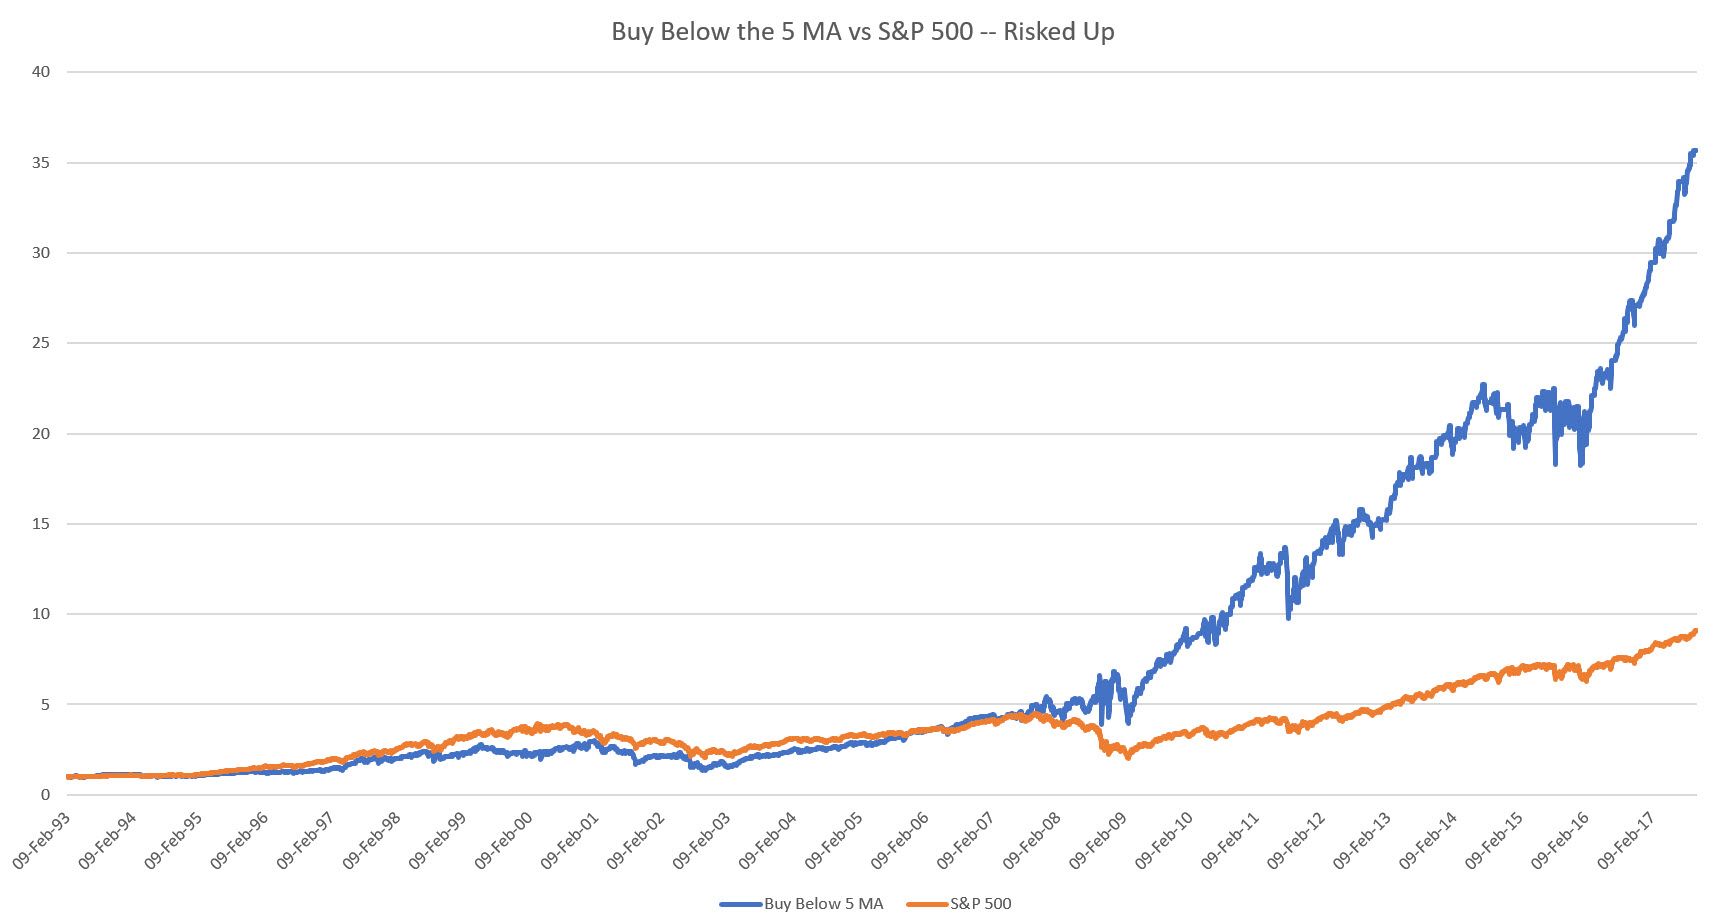 Buying Below MA with same Risk as S&P 500